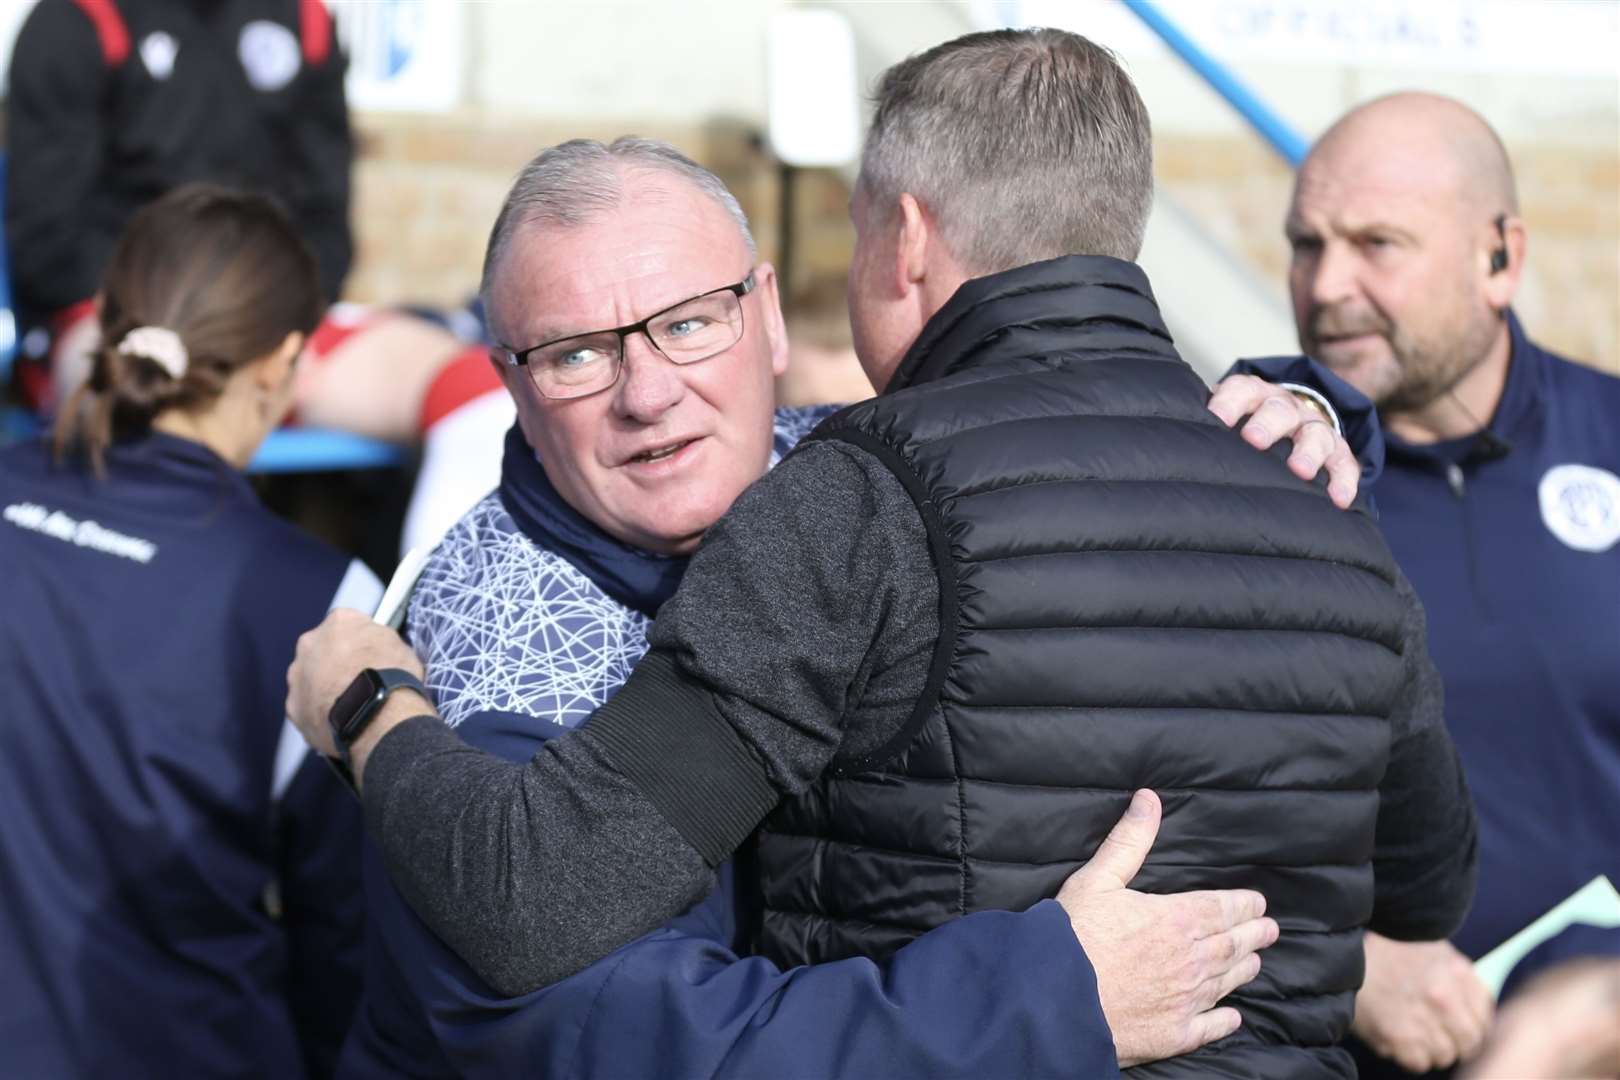 Steve Evans and Neil Harris embrace before the match at Priestfield that ended 1-1